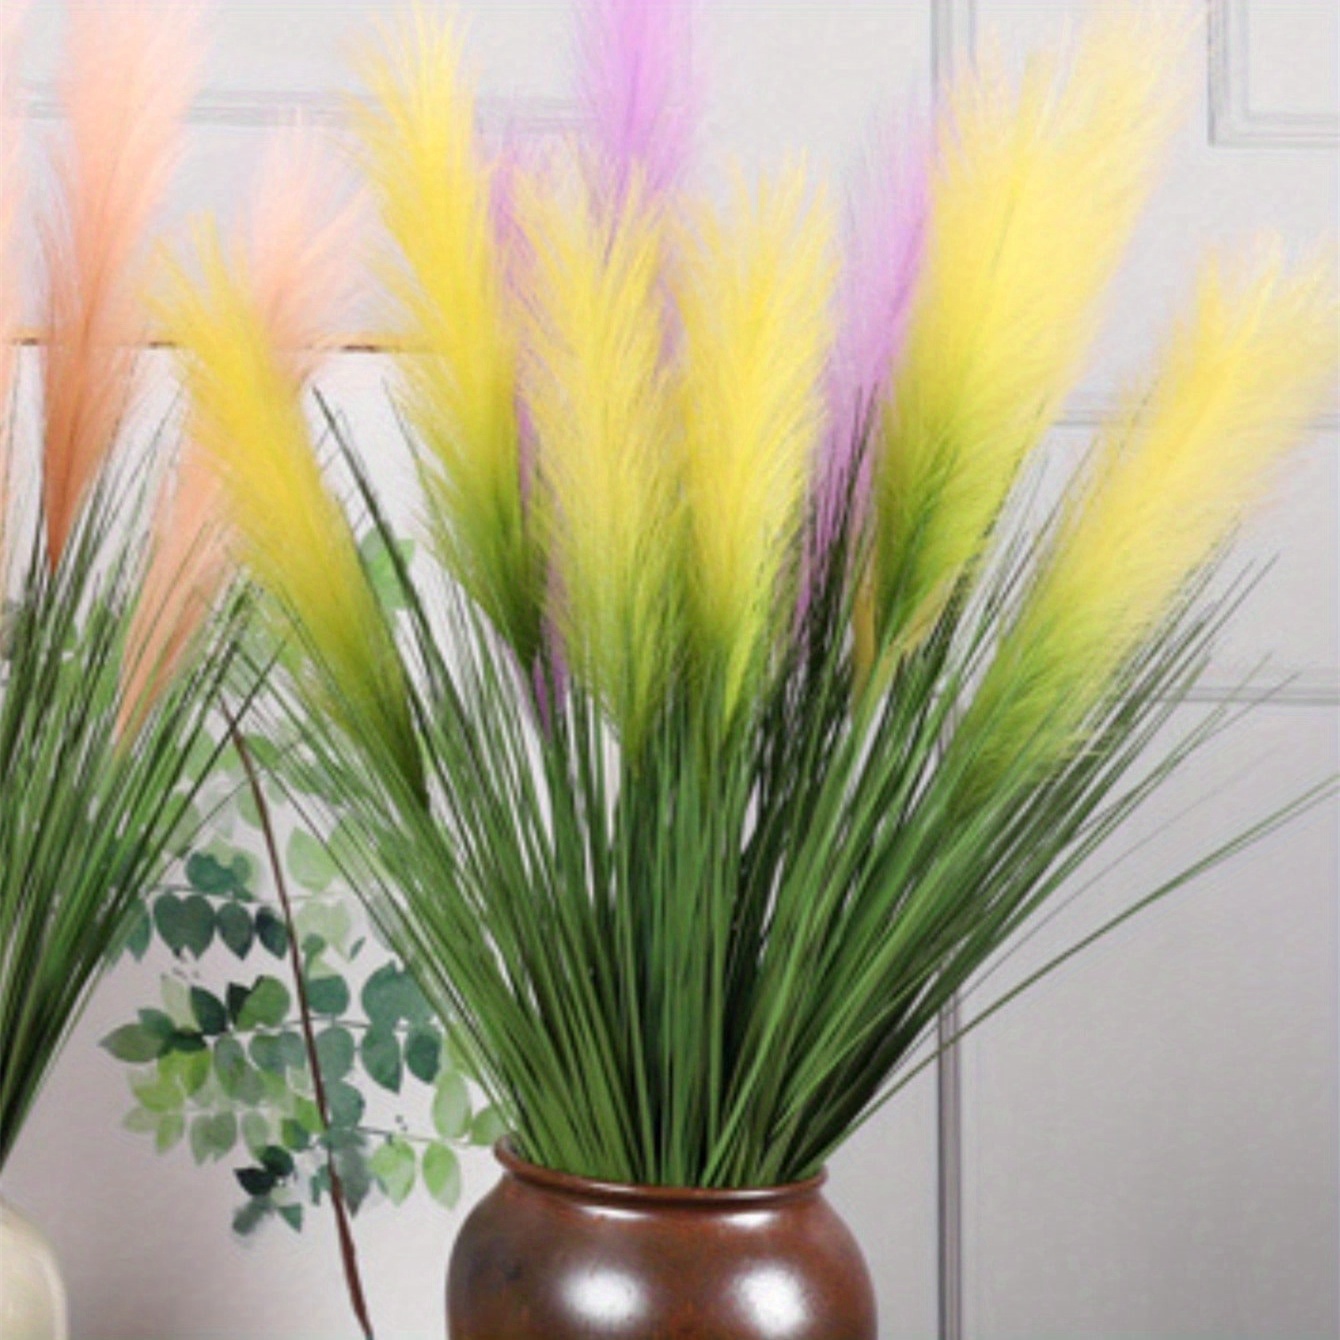 

2 Bunches Artificial Greenery Plants With Reed Flowers, 33.5" Faux Reed Grass Fake Shrubs Outdoor Plant Bouquet Wheat Grass For Floor Decorative Home Garden Wedding Decor